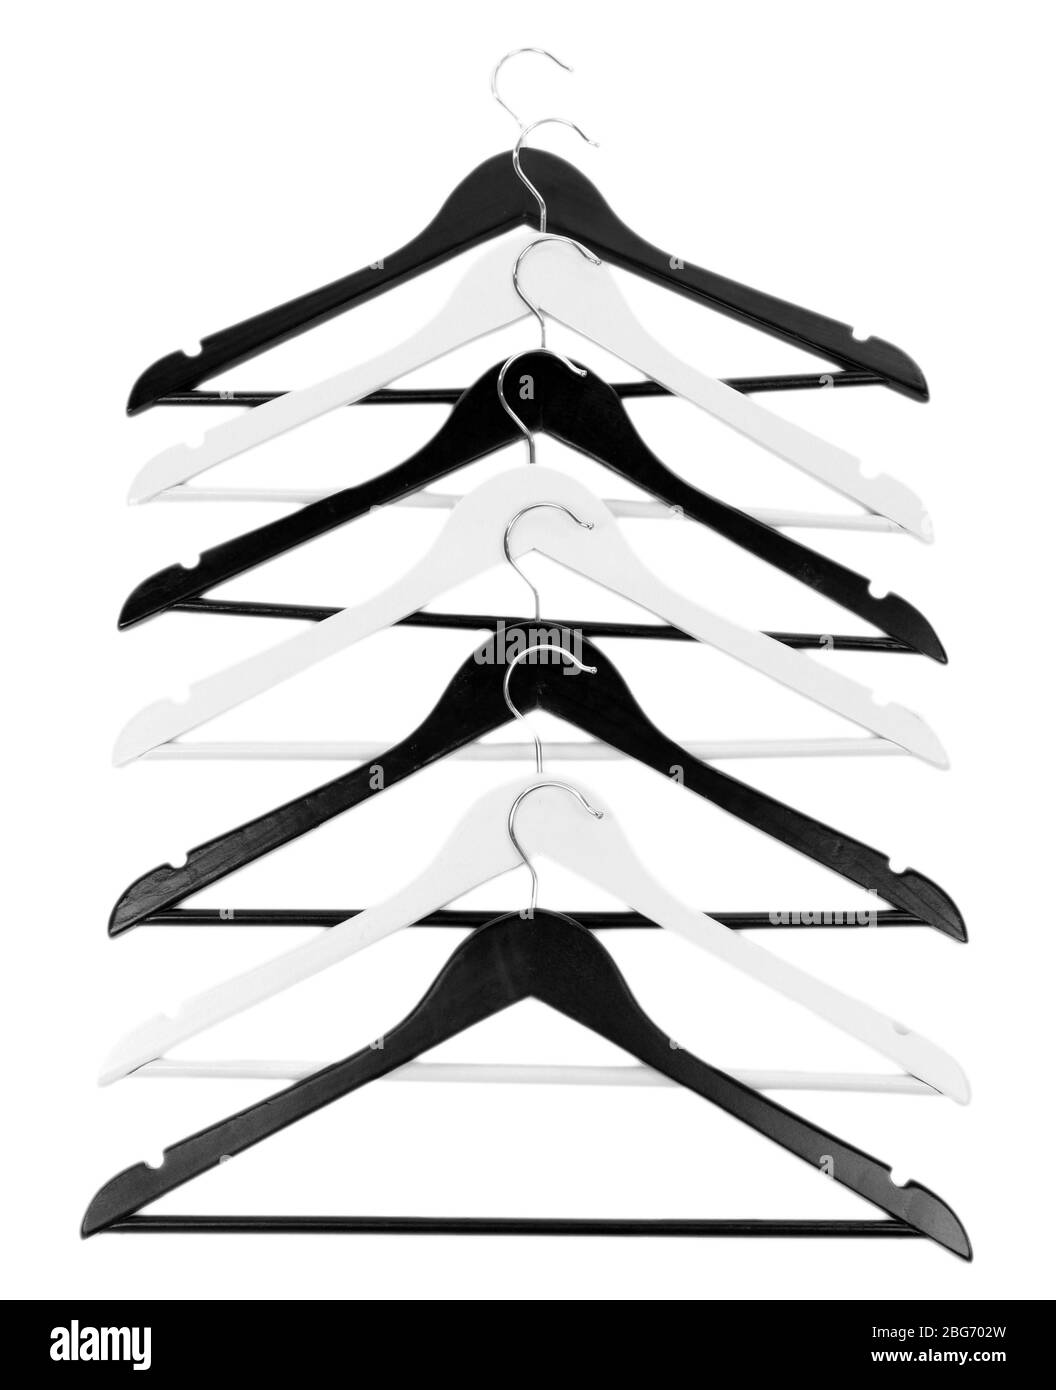 Black and white clothes hangers isolated on white Stock Photo